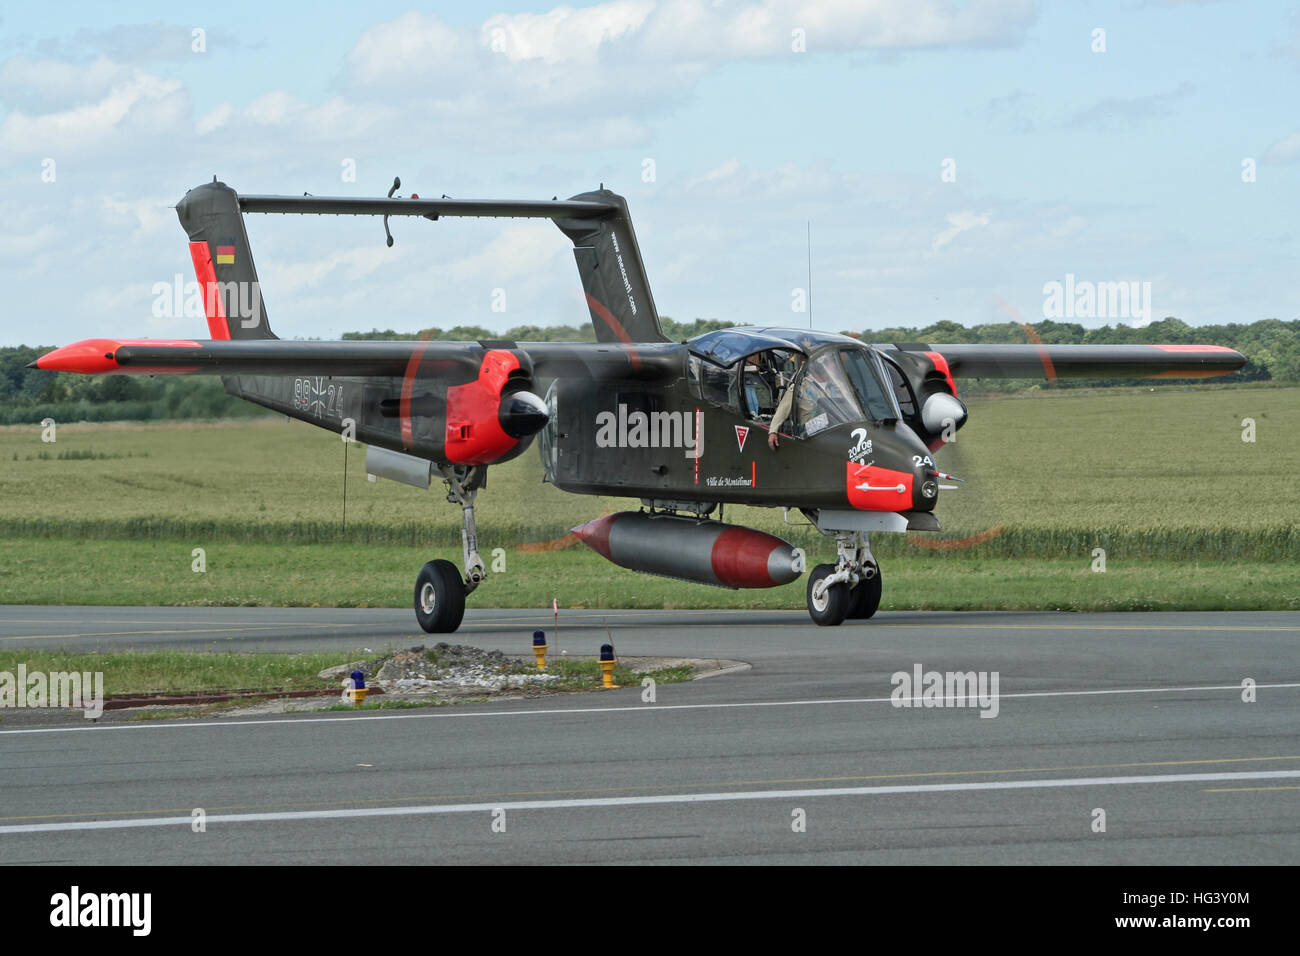 North American Rockwell OV-10 Bronco aircraft with German Air Force markings taxiing Stock Photo